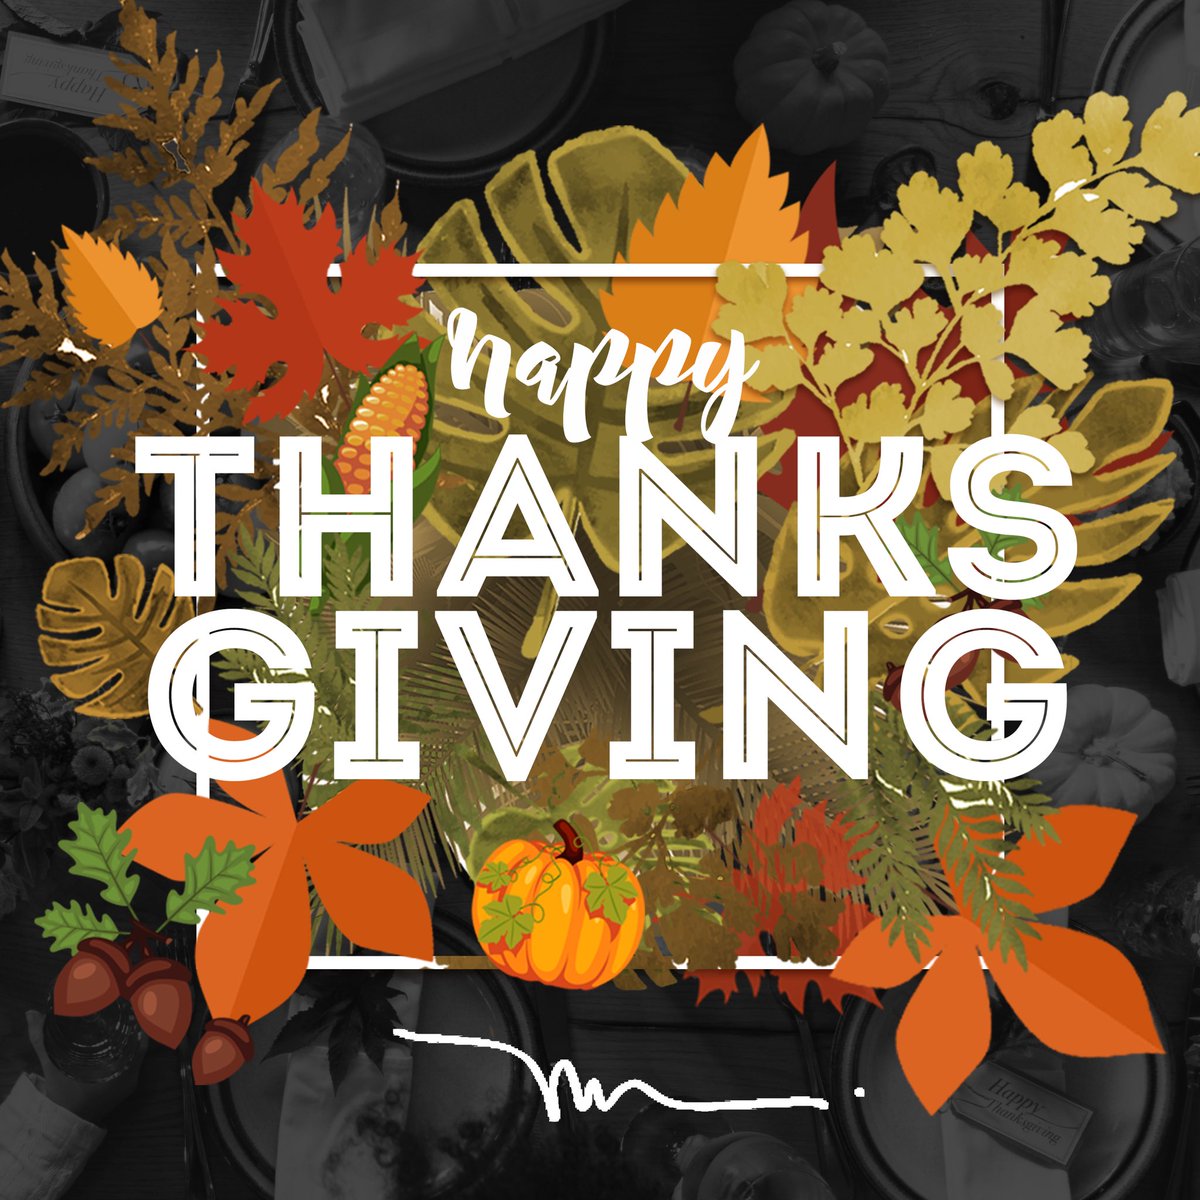 #HappyThanksgiving It’s time to share the love and be thankful for each other. https://t.co/9m3tX8c6Iy